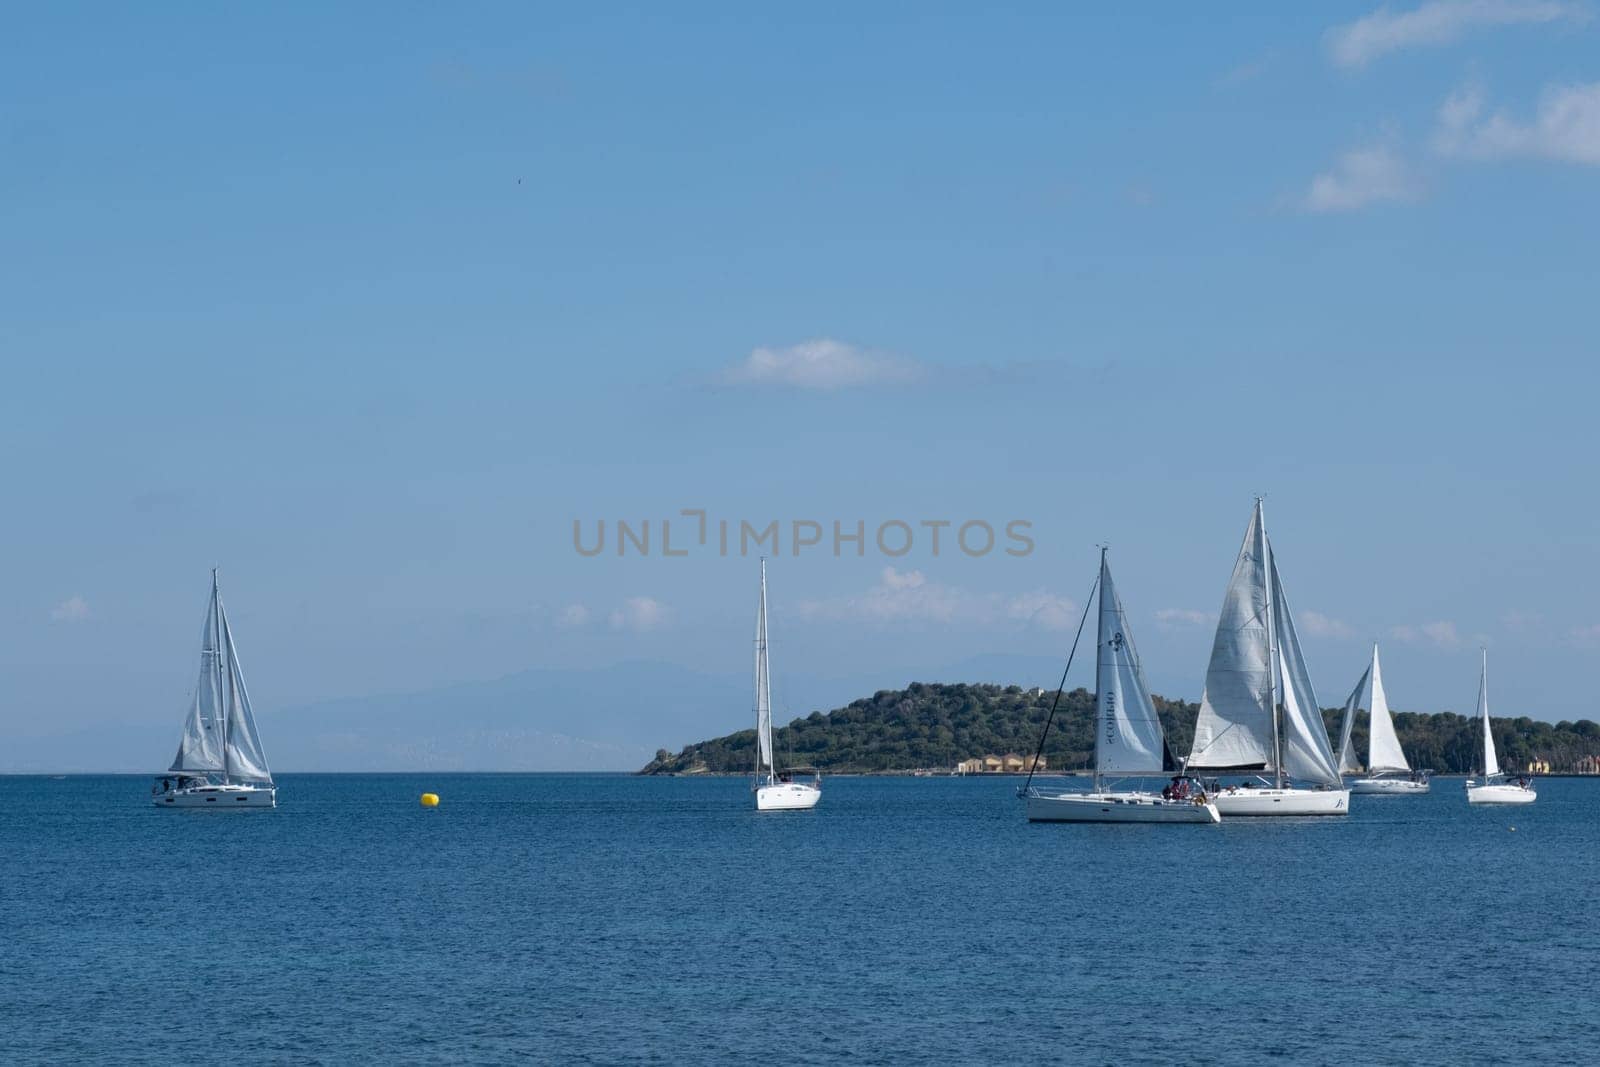 A fleet of sailboats peacefully gliding across the vast expanse of water, under the clear blue sky dotted with fluffy clouds, showcasing the beauty of outdoor recreation on the lake